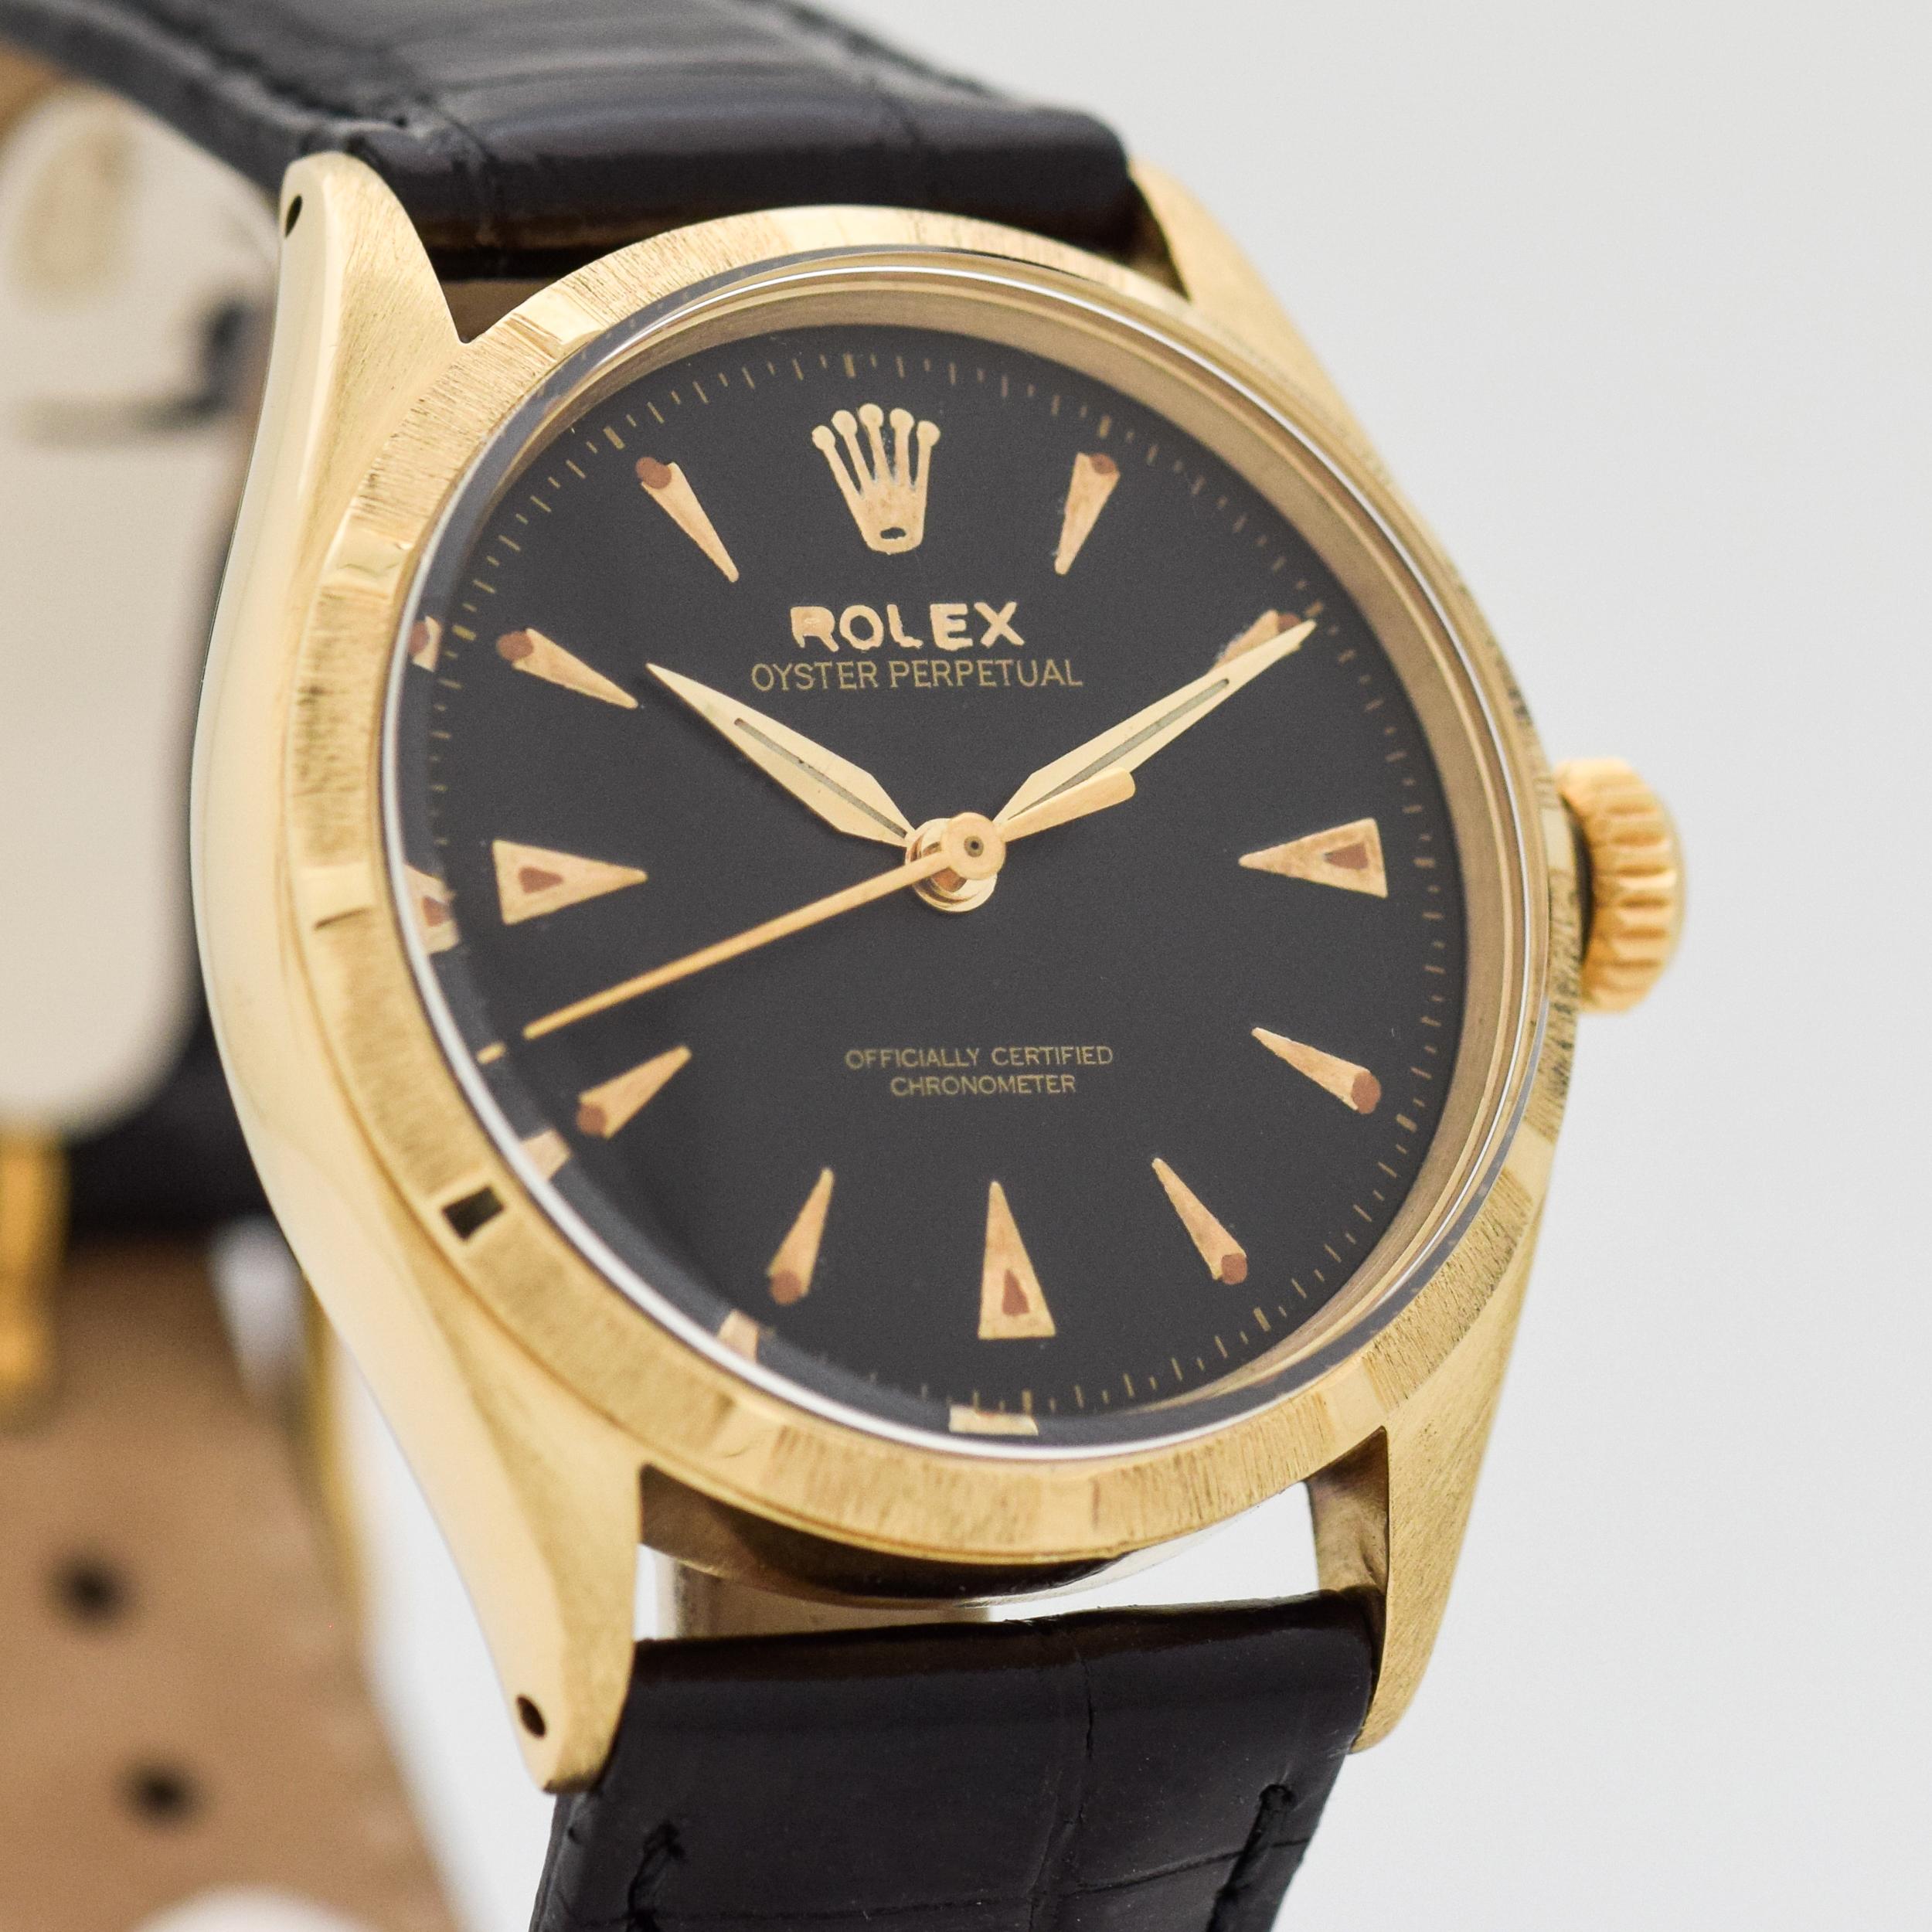 1952 Vintage Rolex Oyster Perpetual Reference 6285. 14K Yellow Gold case. Machined bezel. 34mm wide. Original, but restored black dial with arrow markers. Powered by an 18-jewel, automatic caliber movement. Featured on a Genuine Alligator Glossy